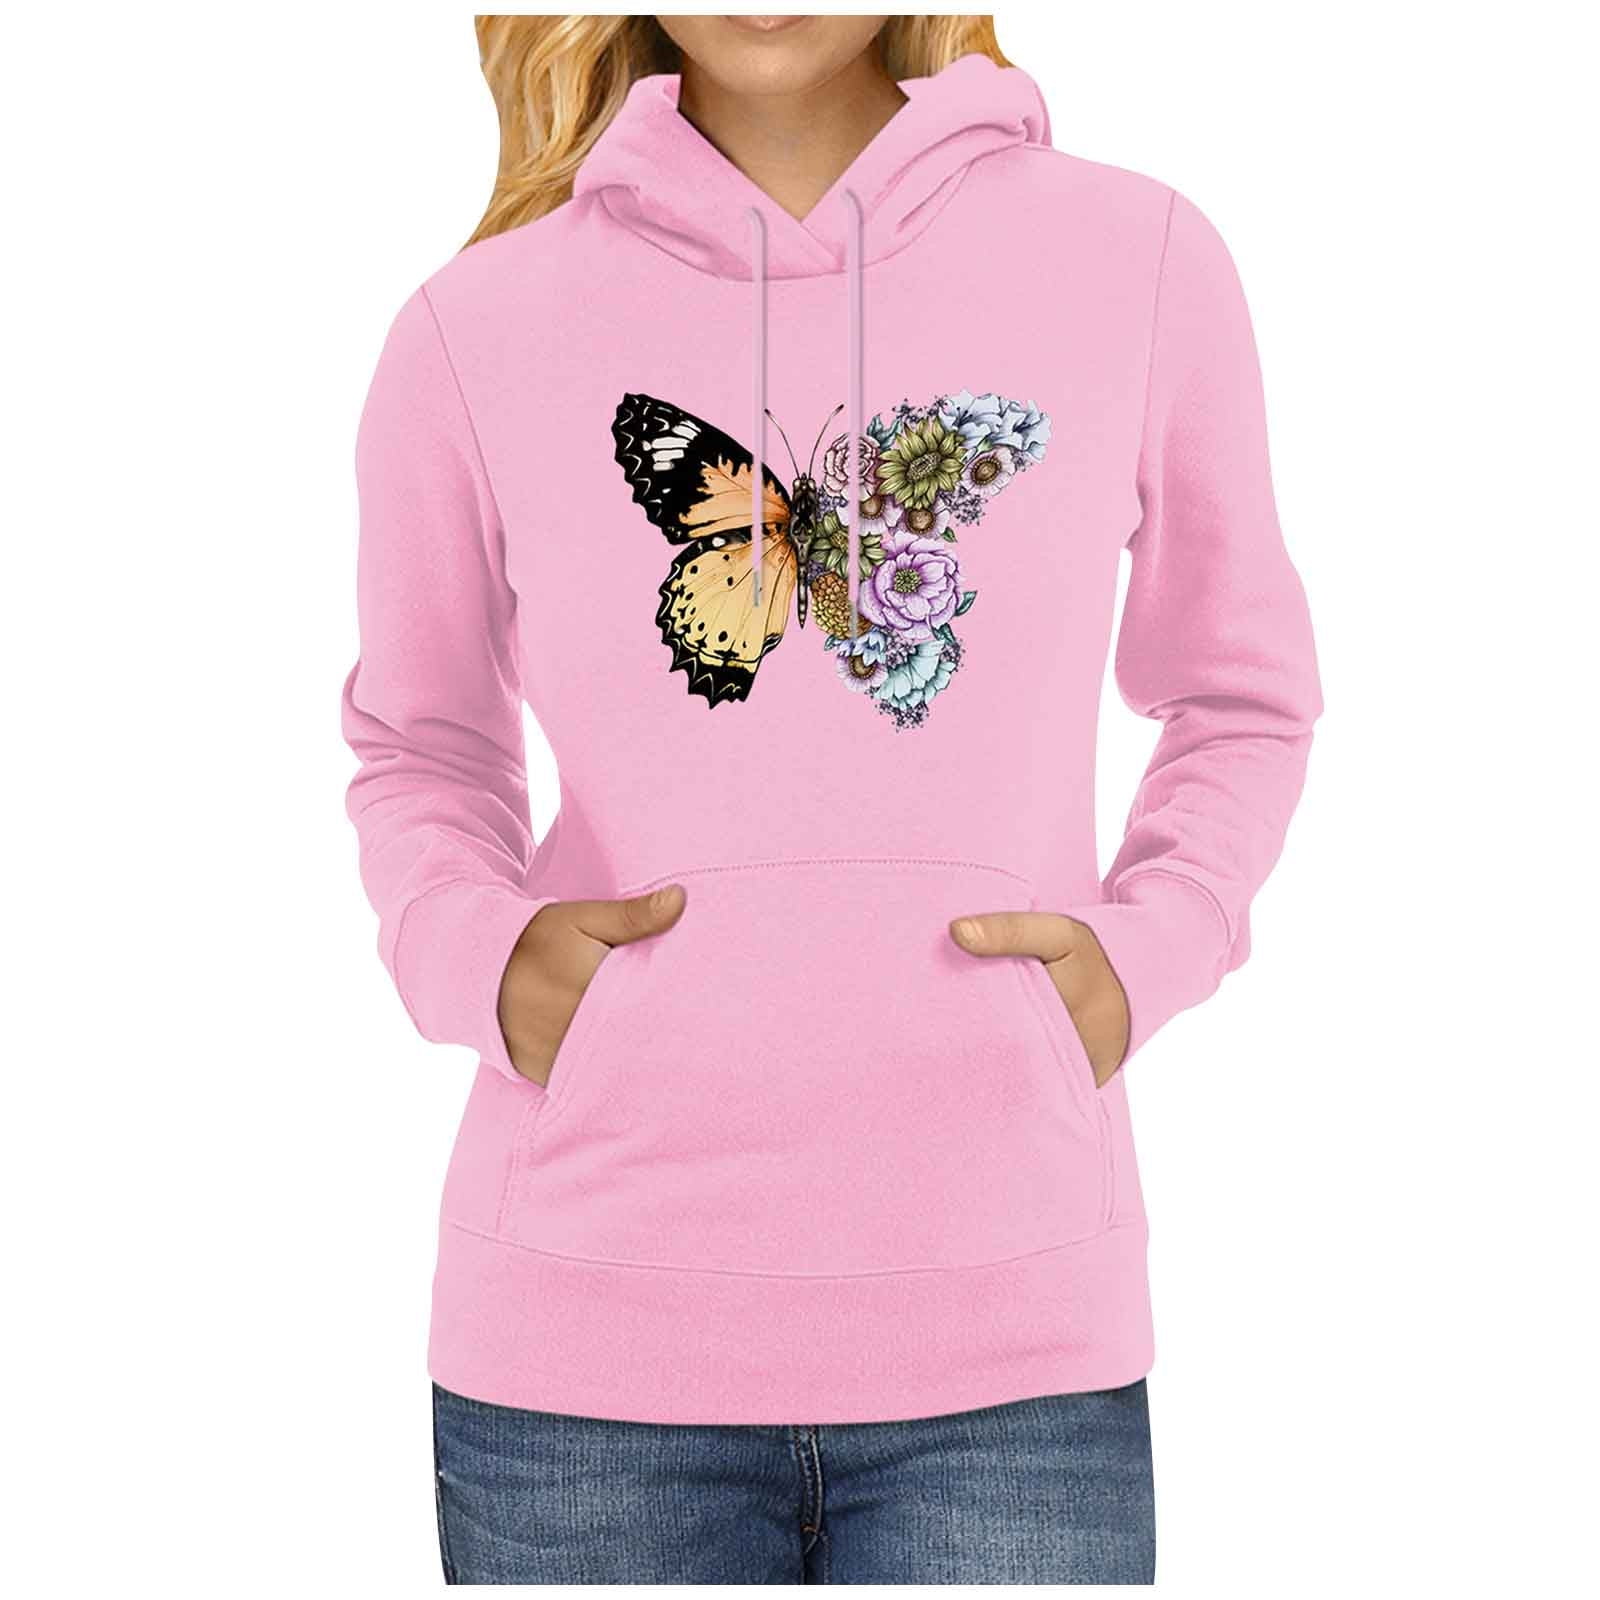 YWDJ Hoodies for Women Plus Size Zip Up Women Fashion Solid Color Printing  Drawstring Hood Long Sleeves Sweater Tops Pink XXL